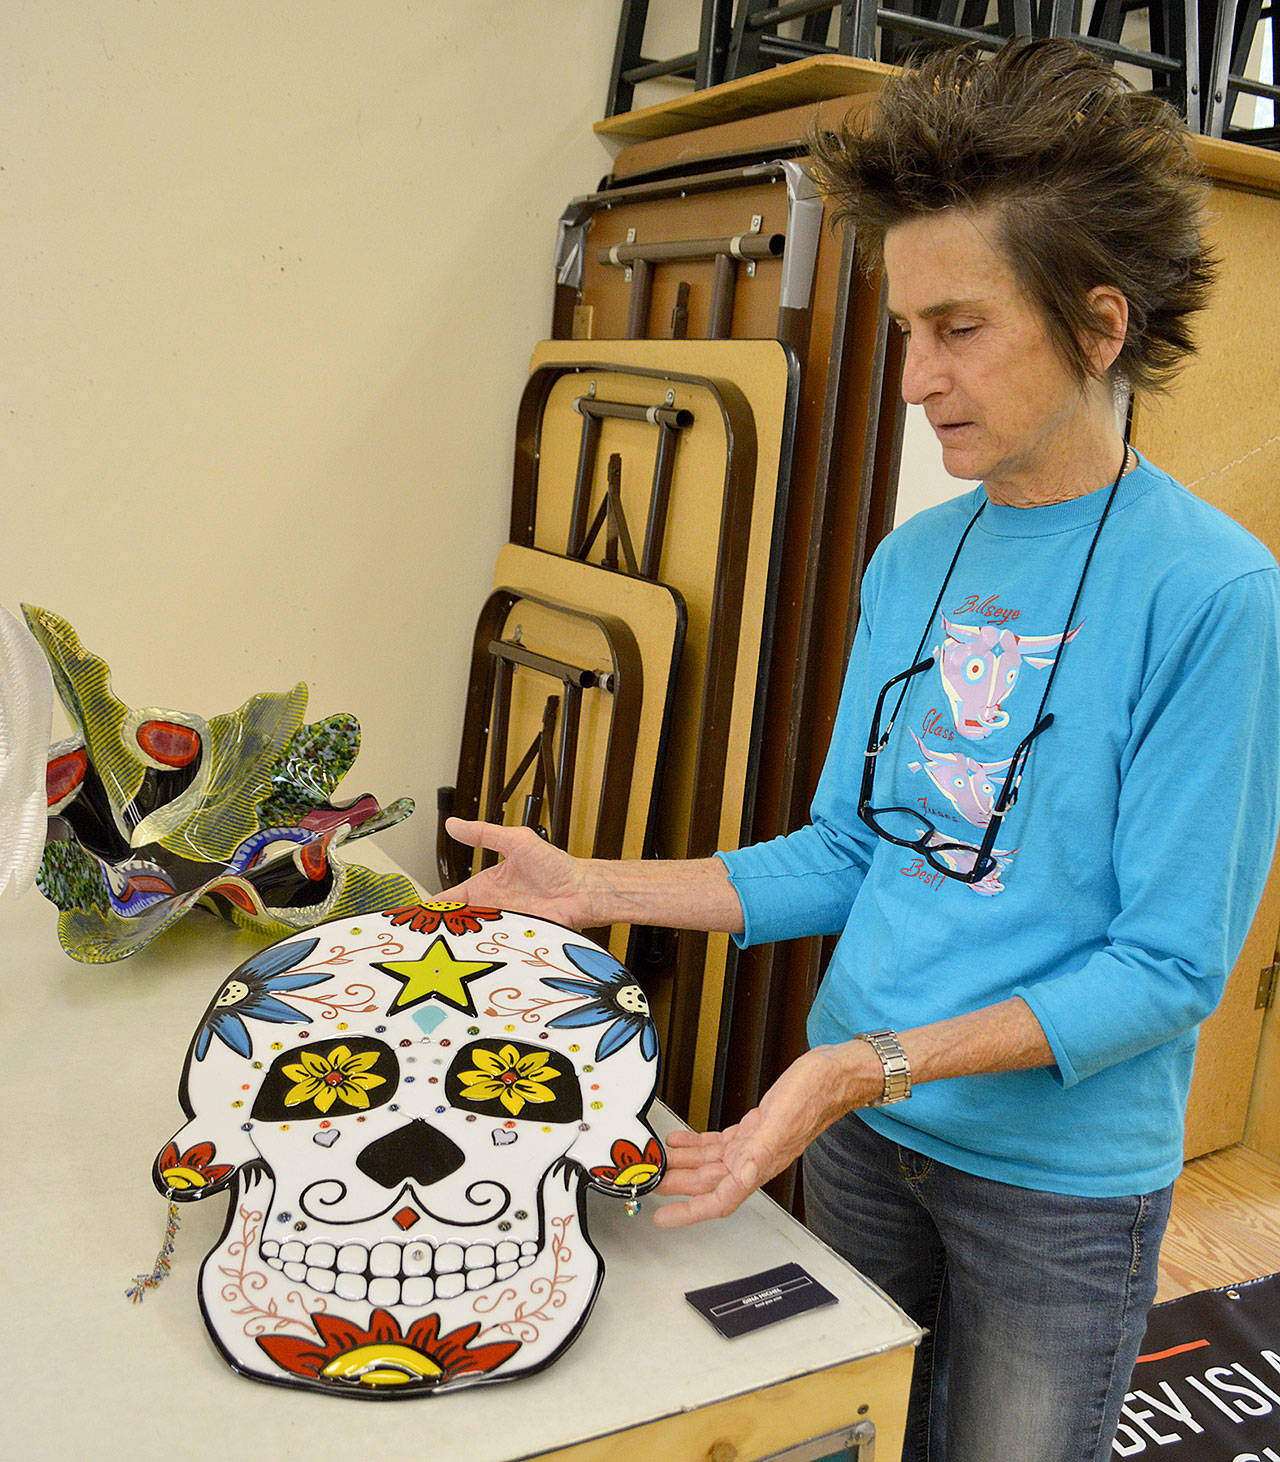 Gina Michel lifts her large fused glass sugar skull, one of her items that will be available at the Whidbey Island Glass Guild’s art show July 5 and 6 at Zech Hall. Photos by Laura Guido/Whidbey News Group